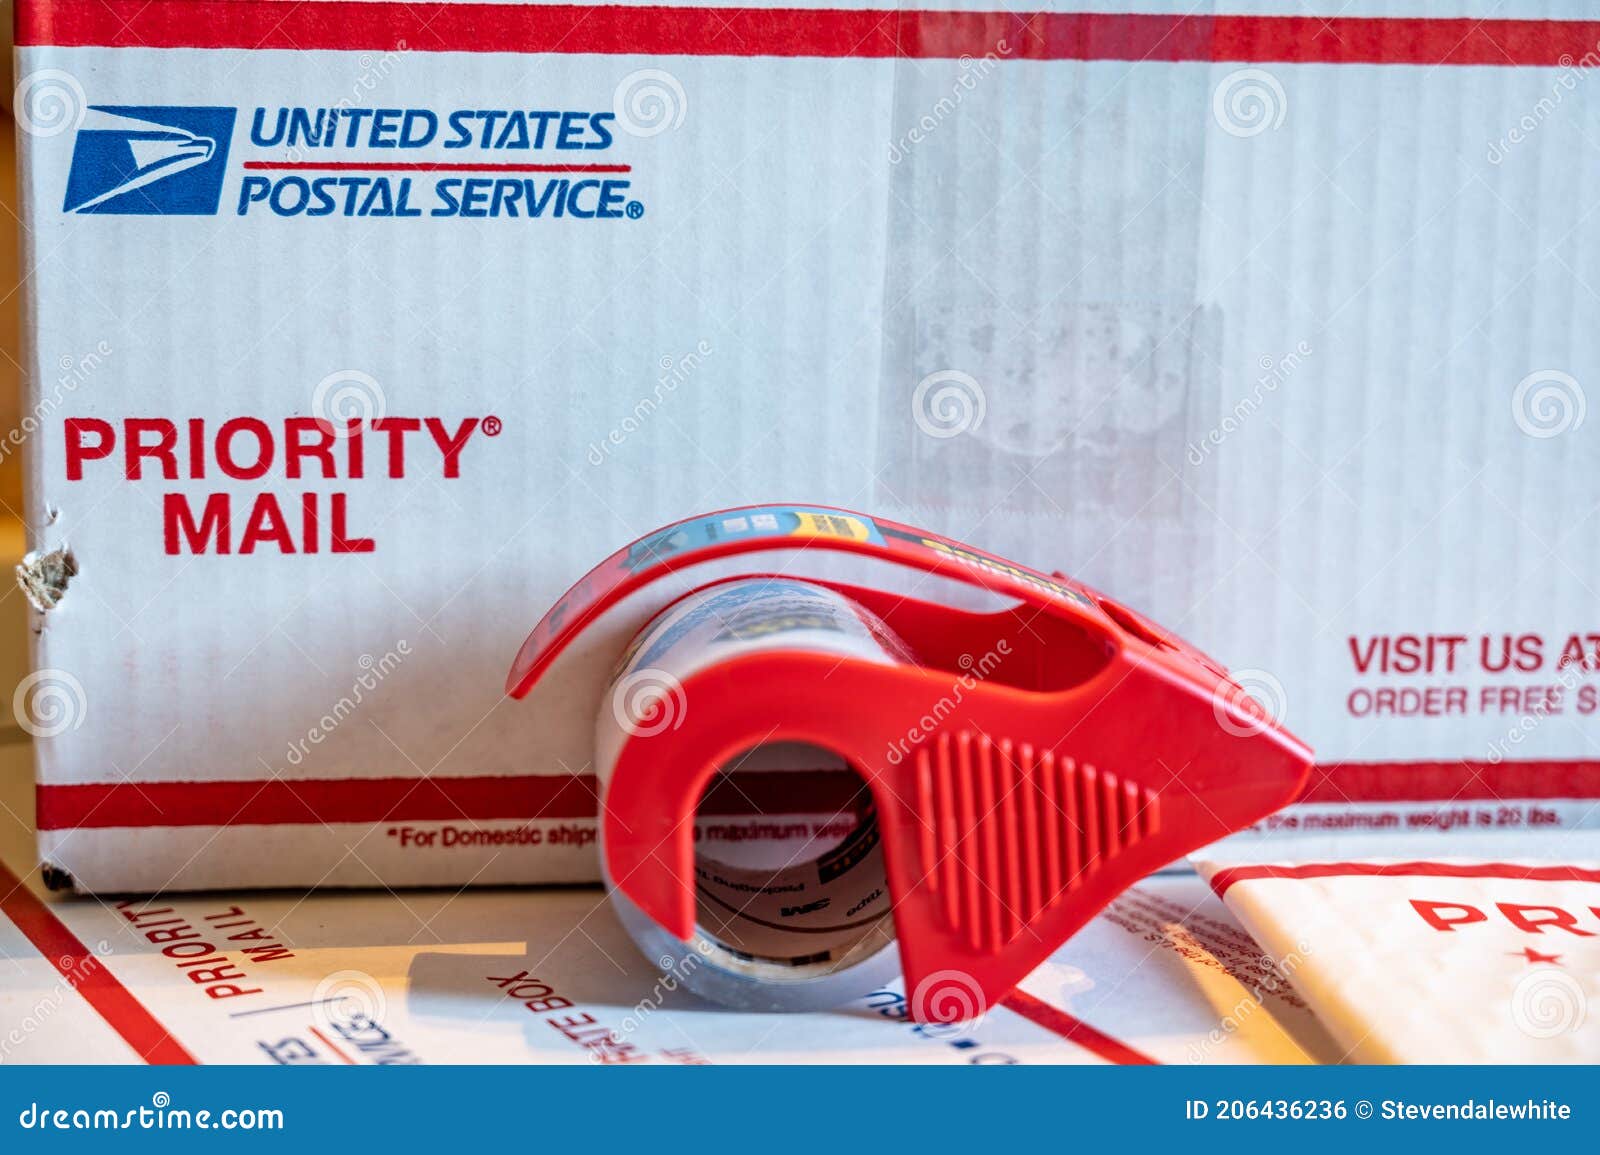 How To Get Free Shipping Supplies From USPS  YouTube